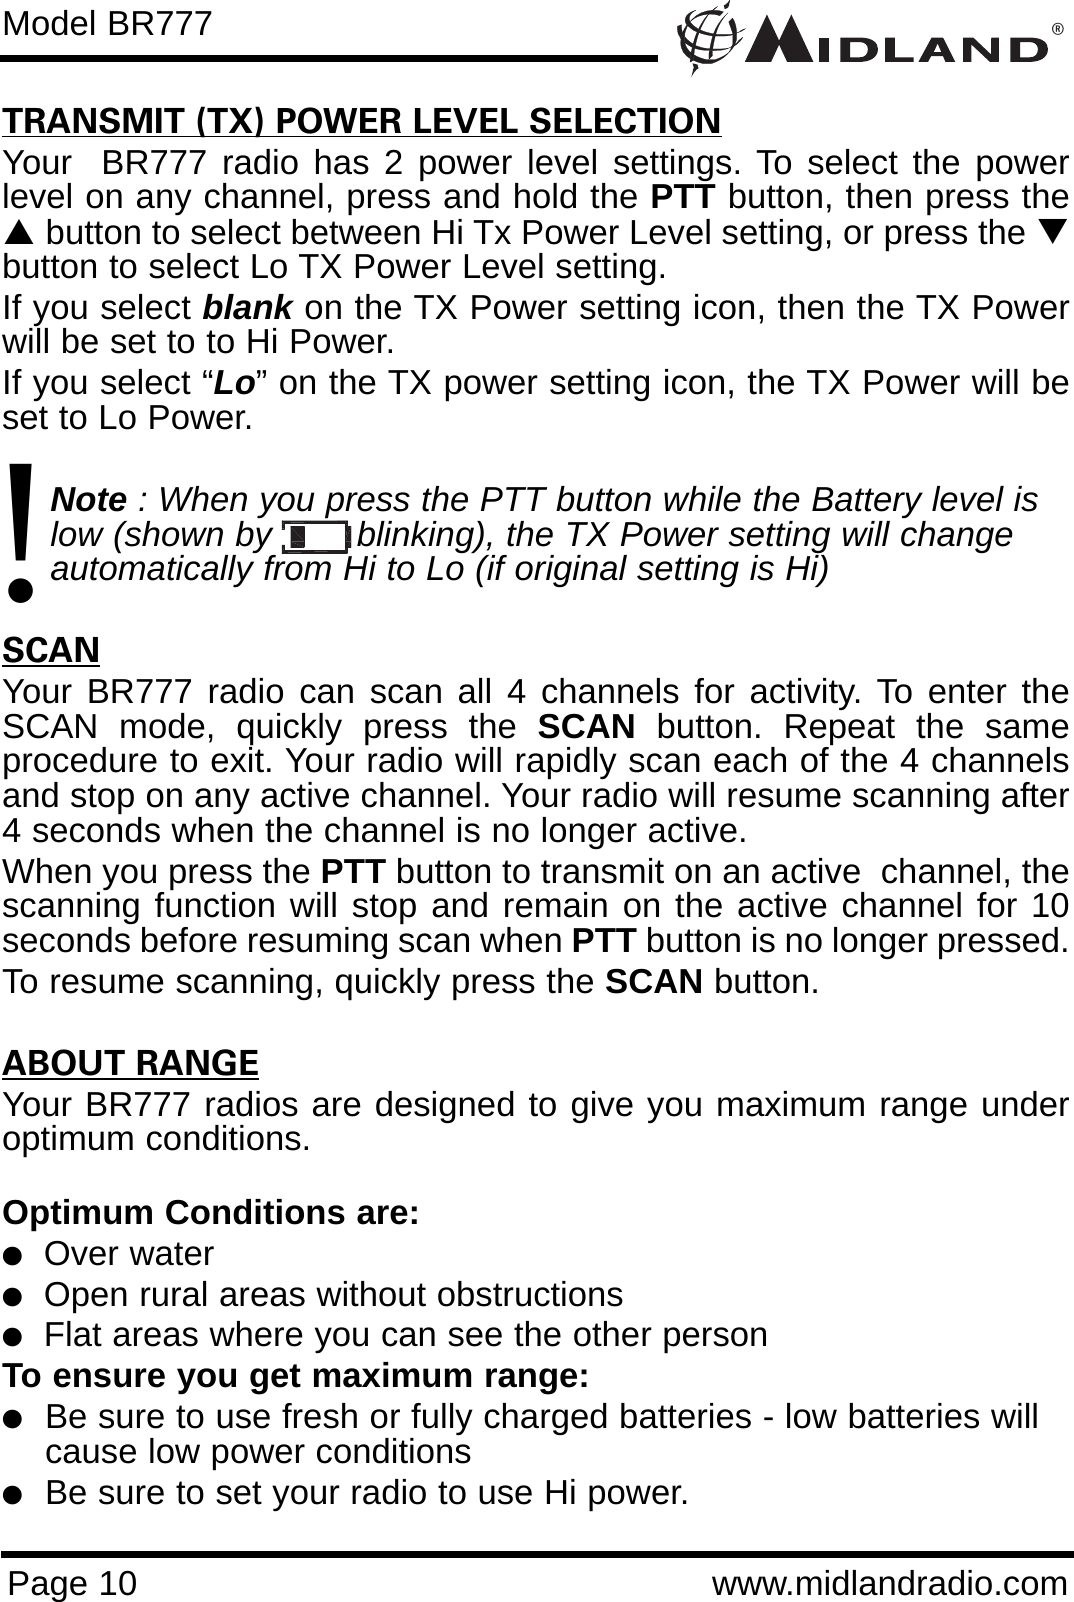 ®Page 10 www.midlandradio.comModel BR777TRANSMIT (TX) POWER LEVEL SELECTIONYour  BR777 radio has 2 power level settings. To select the powerlevel on any channel, press and hold the PTT button, then press theSbutton to select between Hi Tx Power Level setting, or press the Tbutton to select Lo TX Power Level setting. If you select blank on the TX Power setting icon, then the TX Powerwill be set to to Hi Power. If you select “Lo” on the TX power setting icon, the TX Power will beset to Lo Power. Note : When you press the PTT button while the Battery level is low (shown by        blinking), the TX Power setting will change  automatically from Hi to Lo (if original setting is Hi)SCANYour BR777 radio can scan all 4 channels for activity. To enter theSCAN mode, quickly press the SCAN button. Repeat the sameprocedure to exit. Your radio will rapidly scan each of the 4 channelsand stop on any active channel. Your radio will resume scanning after4 seconds when the channel is no longer active.When you press the PTT button to transmit on an active  channel, thescanning function will stop and remain on the active channel for 10seconds before resuming scan when PTT button is no longer pressed. To resume scanning, quickly press the SCAN button.ABOUT RANGEYour BR777 radios are designed to give you maximum range underoptimum conditions.Optimum Conditions are: lOver waterlOpen rural areas without obstructionslFlat areas where you can see the other personTo ensure you get maximum range:lBe sure to use fresh or fully charged batteries - low batteries will cause low power conditionslBe sure to set your radio to use Hi power.!